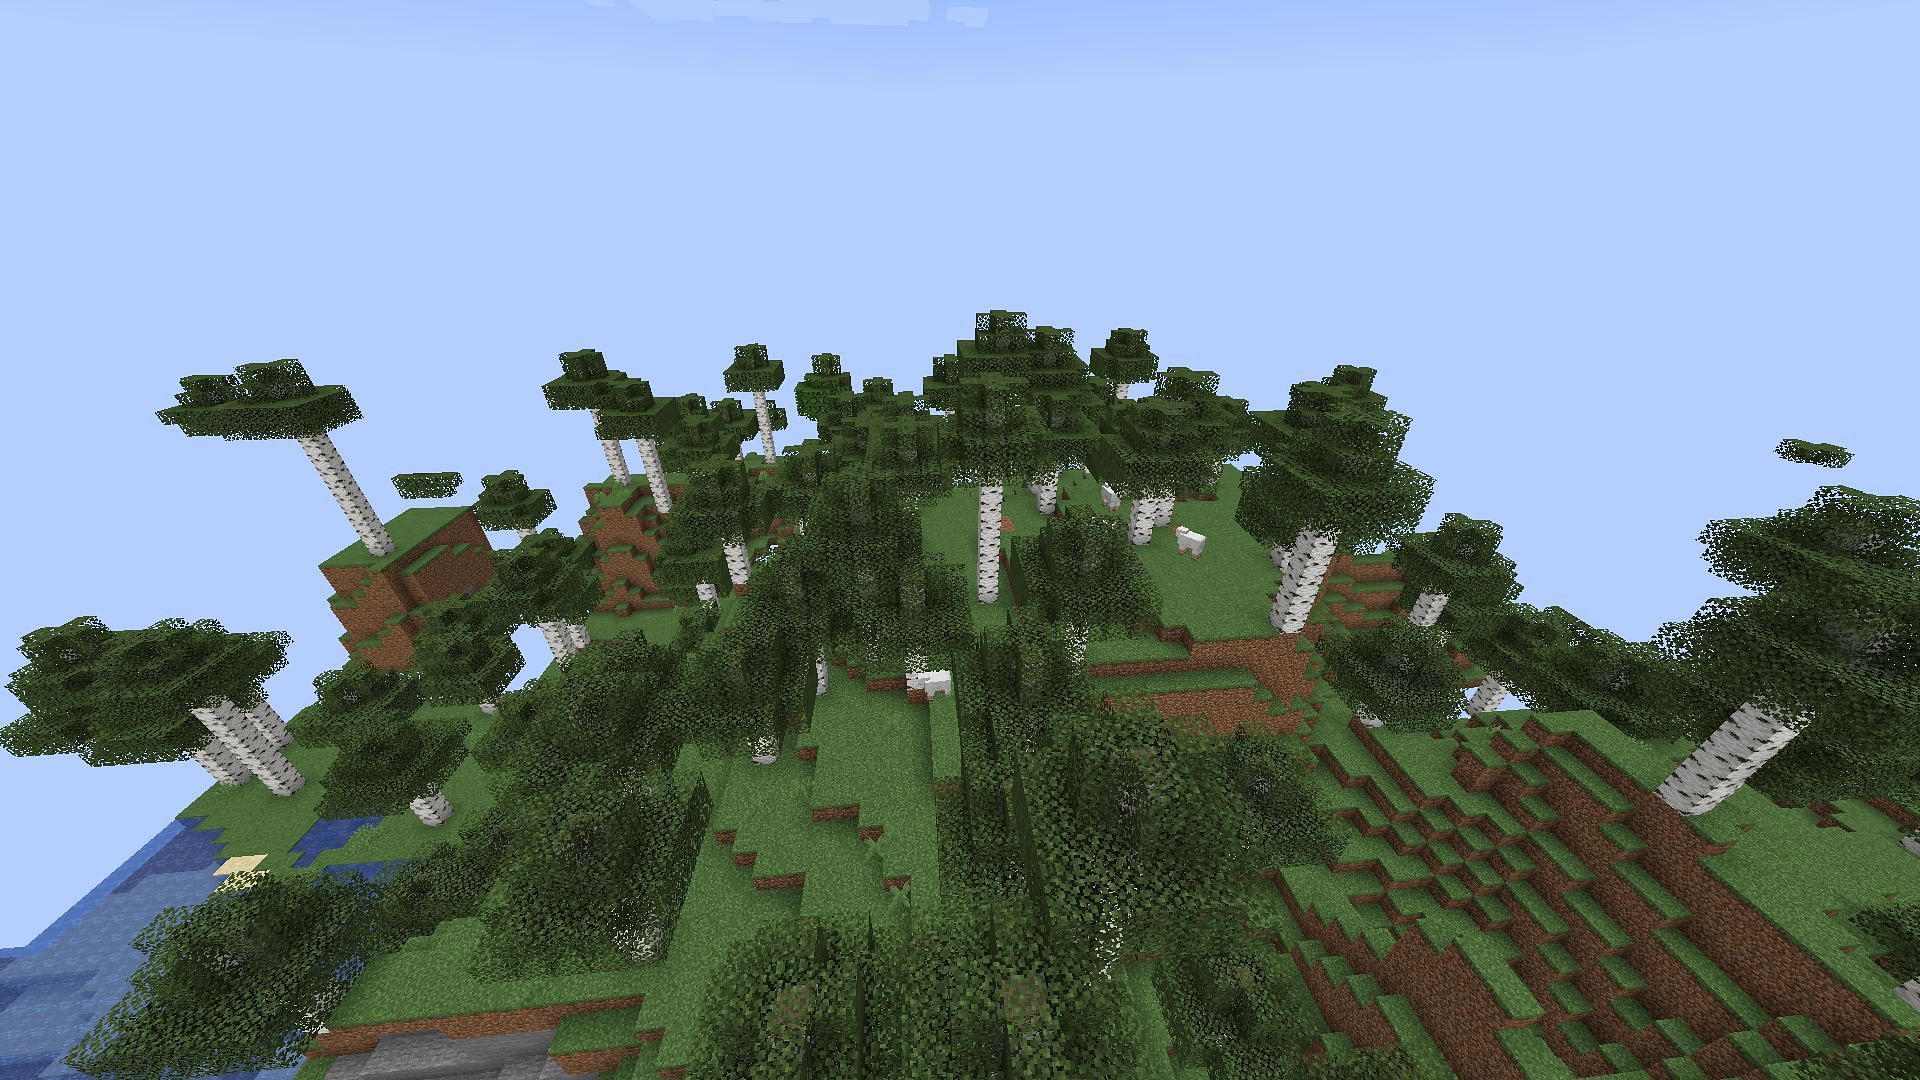 Areas keep reloading as players will move around (Image via Minecraft)